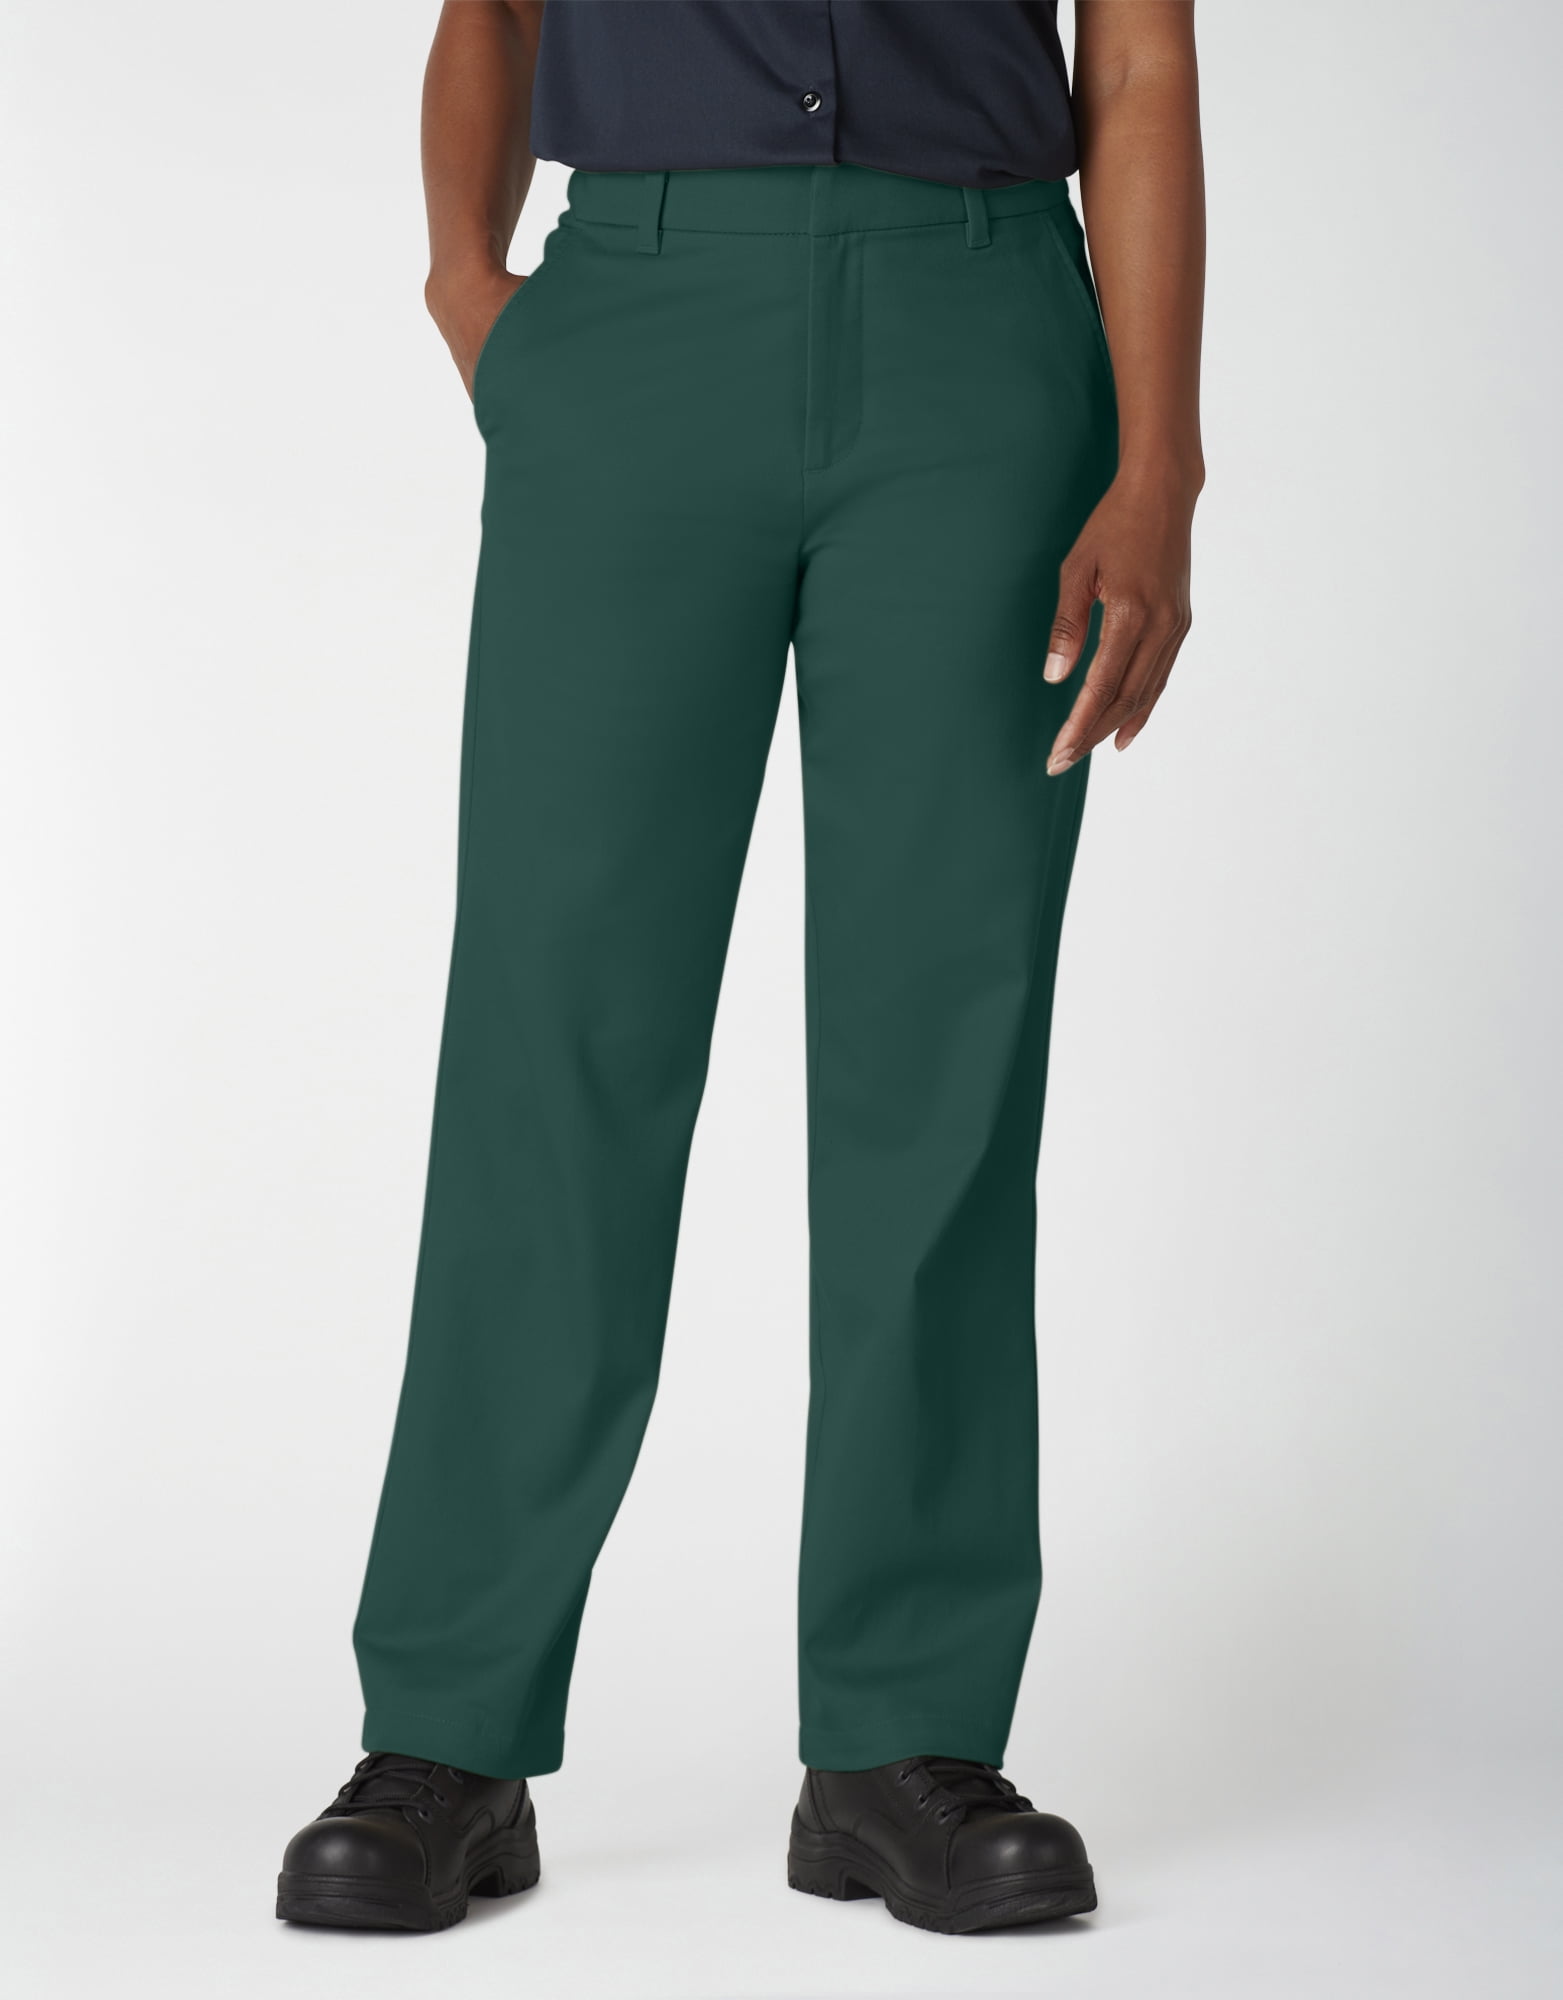 Understrege Invitere grinende Genuine Dickies Women's Relaxed Fit Straight-Leg Flat Front Pant -  Walmart.com